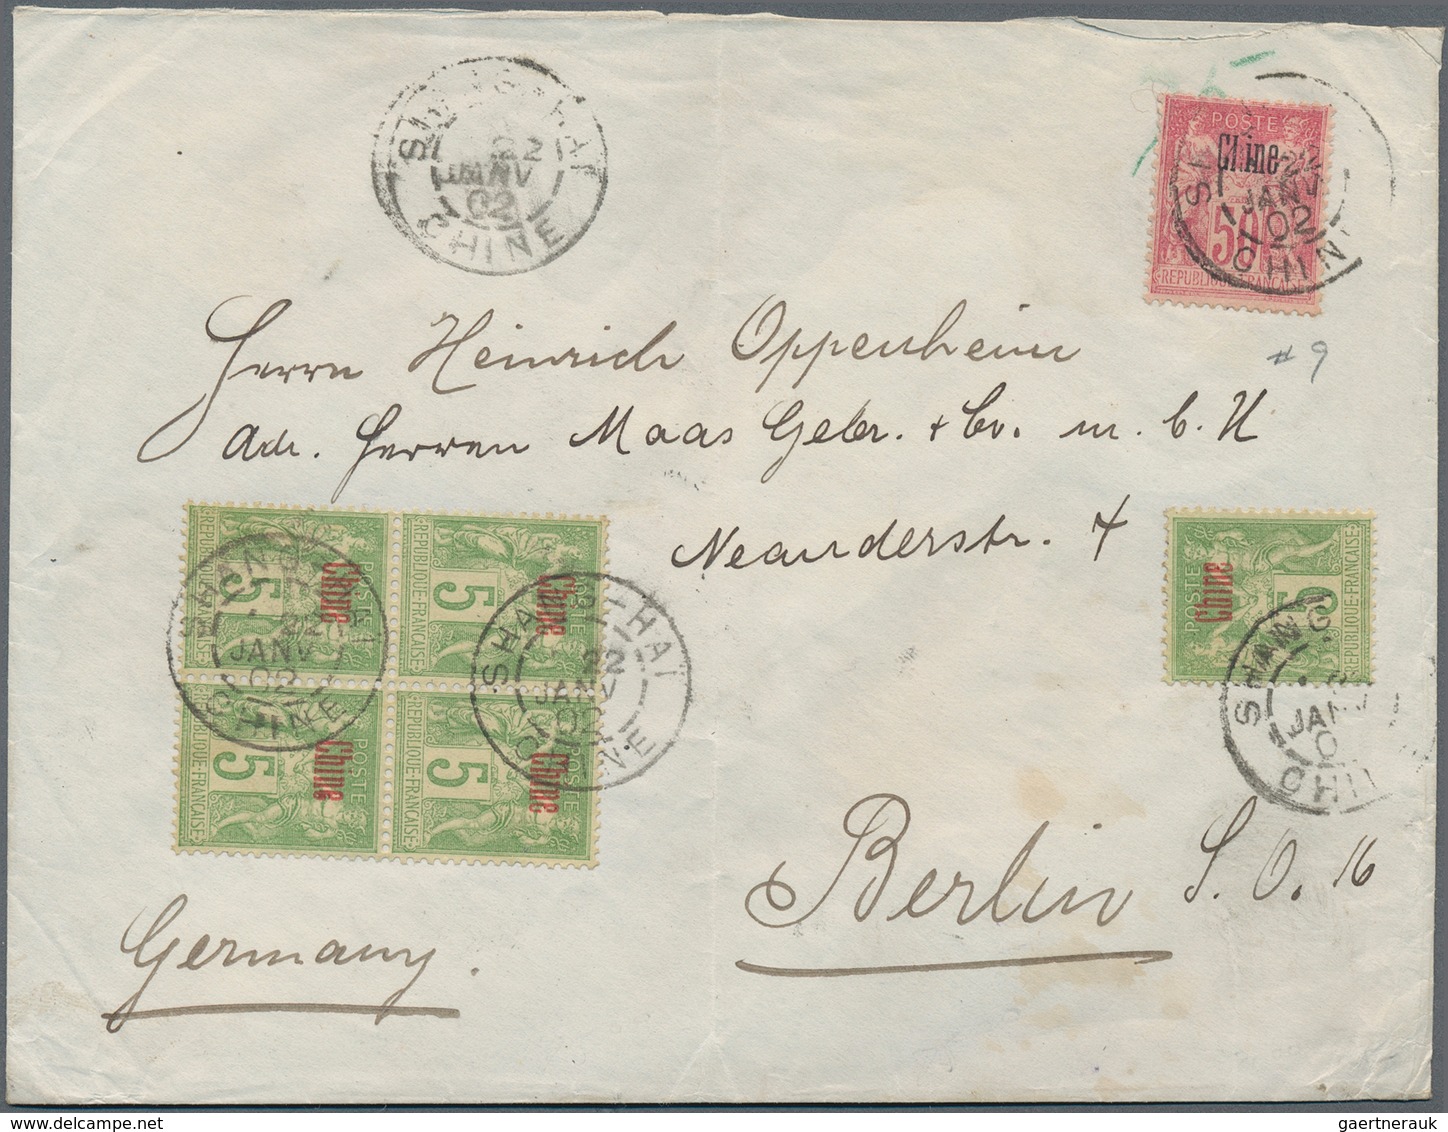 26499 Französische Post in China: 1888/1921, used collection on stocksheets with clear focus on the apprx.